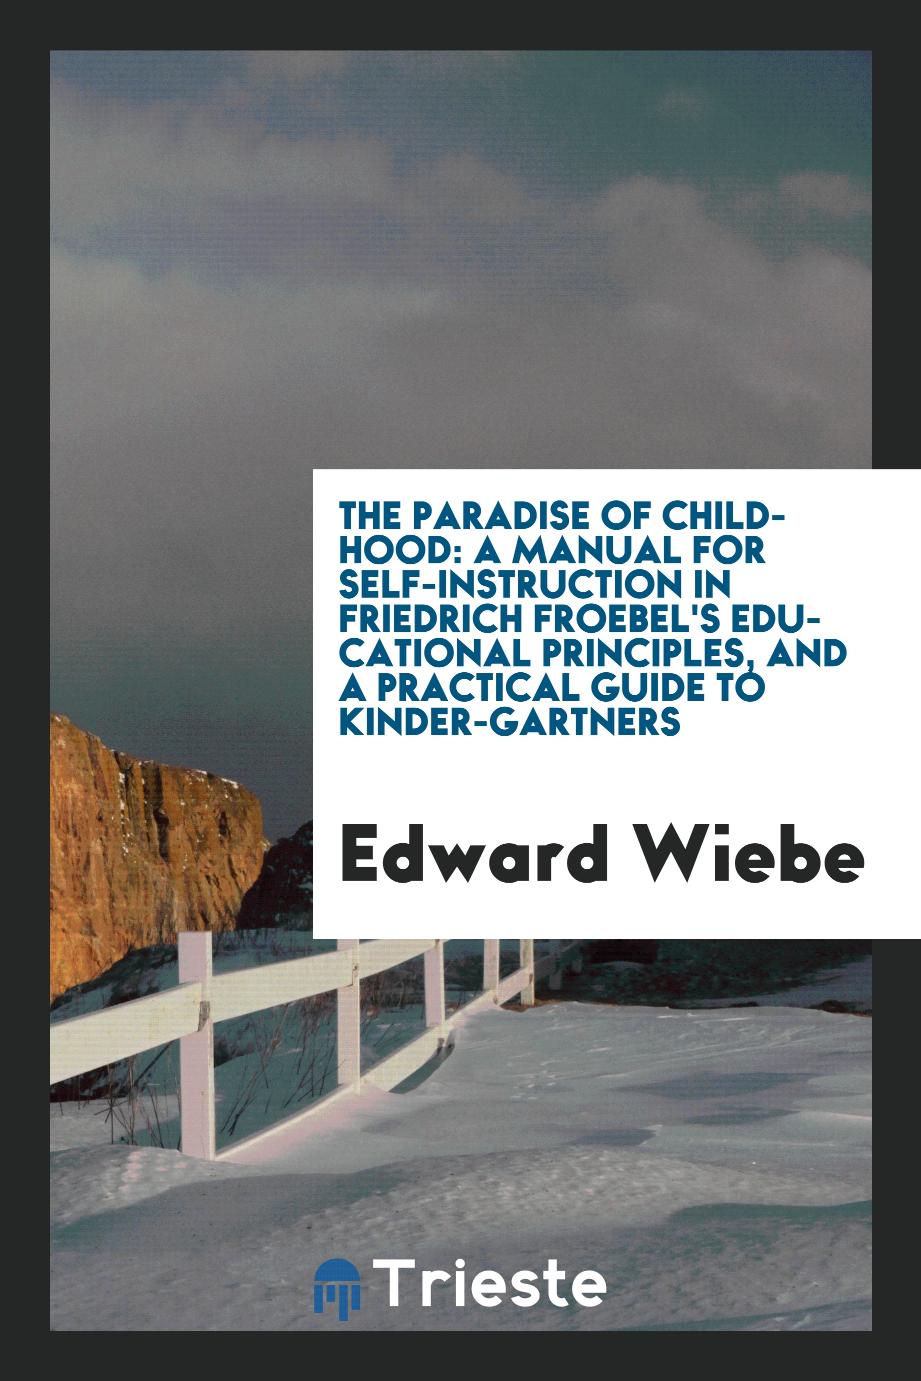 The paradise of childhood: a manual for self-instruction in Friedrich Froebel's educational principles, and a practical guide to kinder-gartners